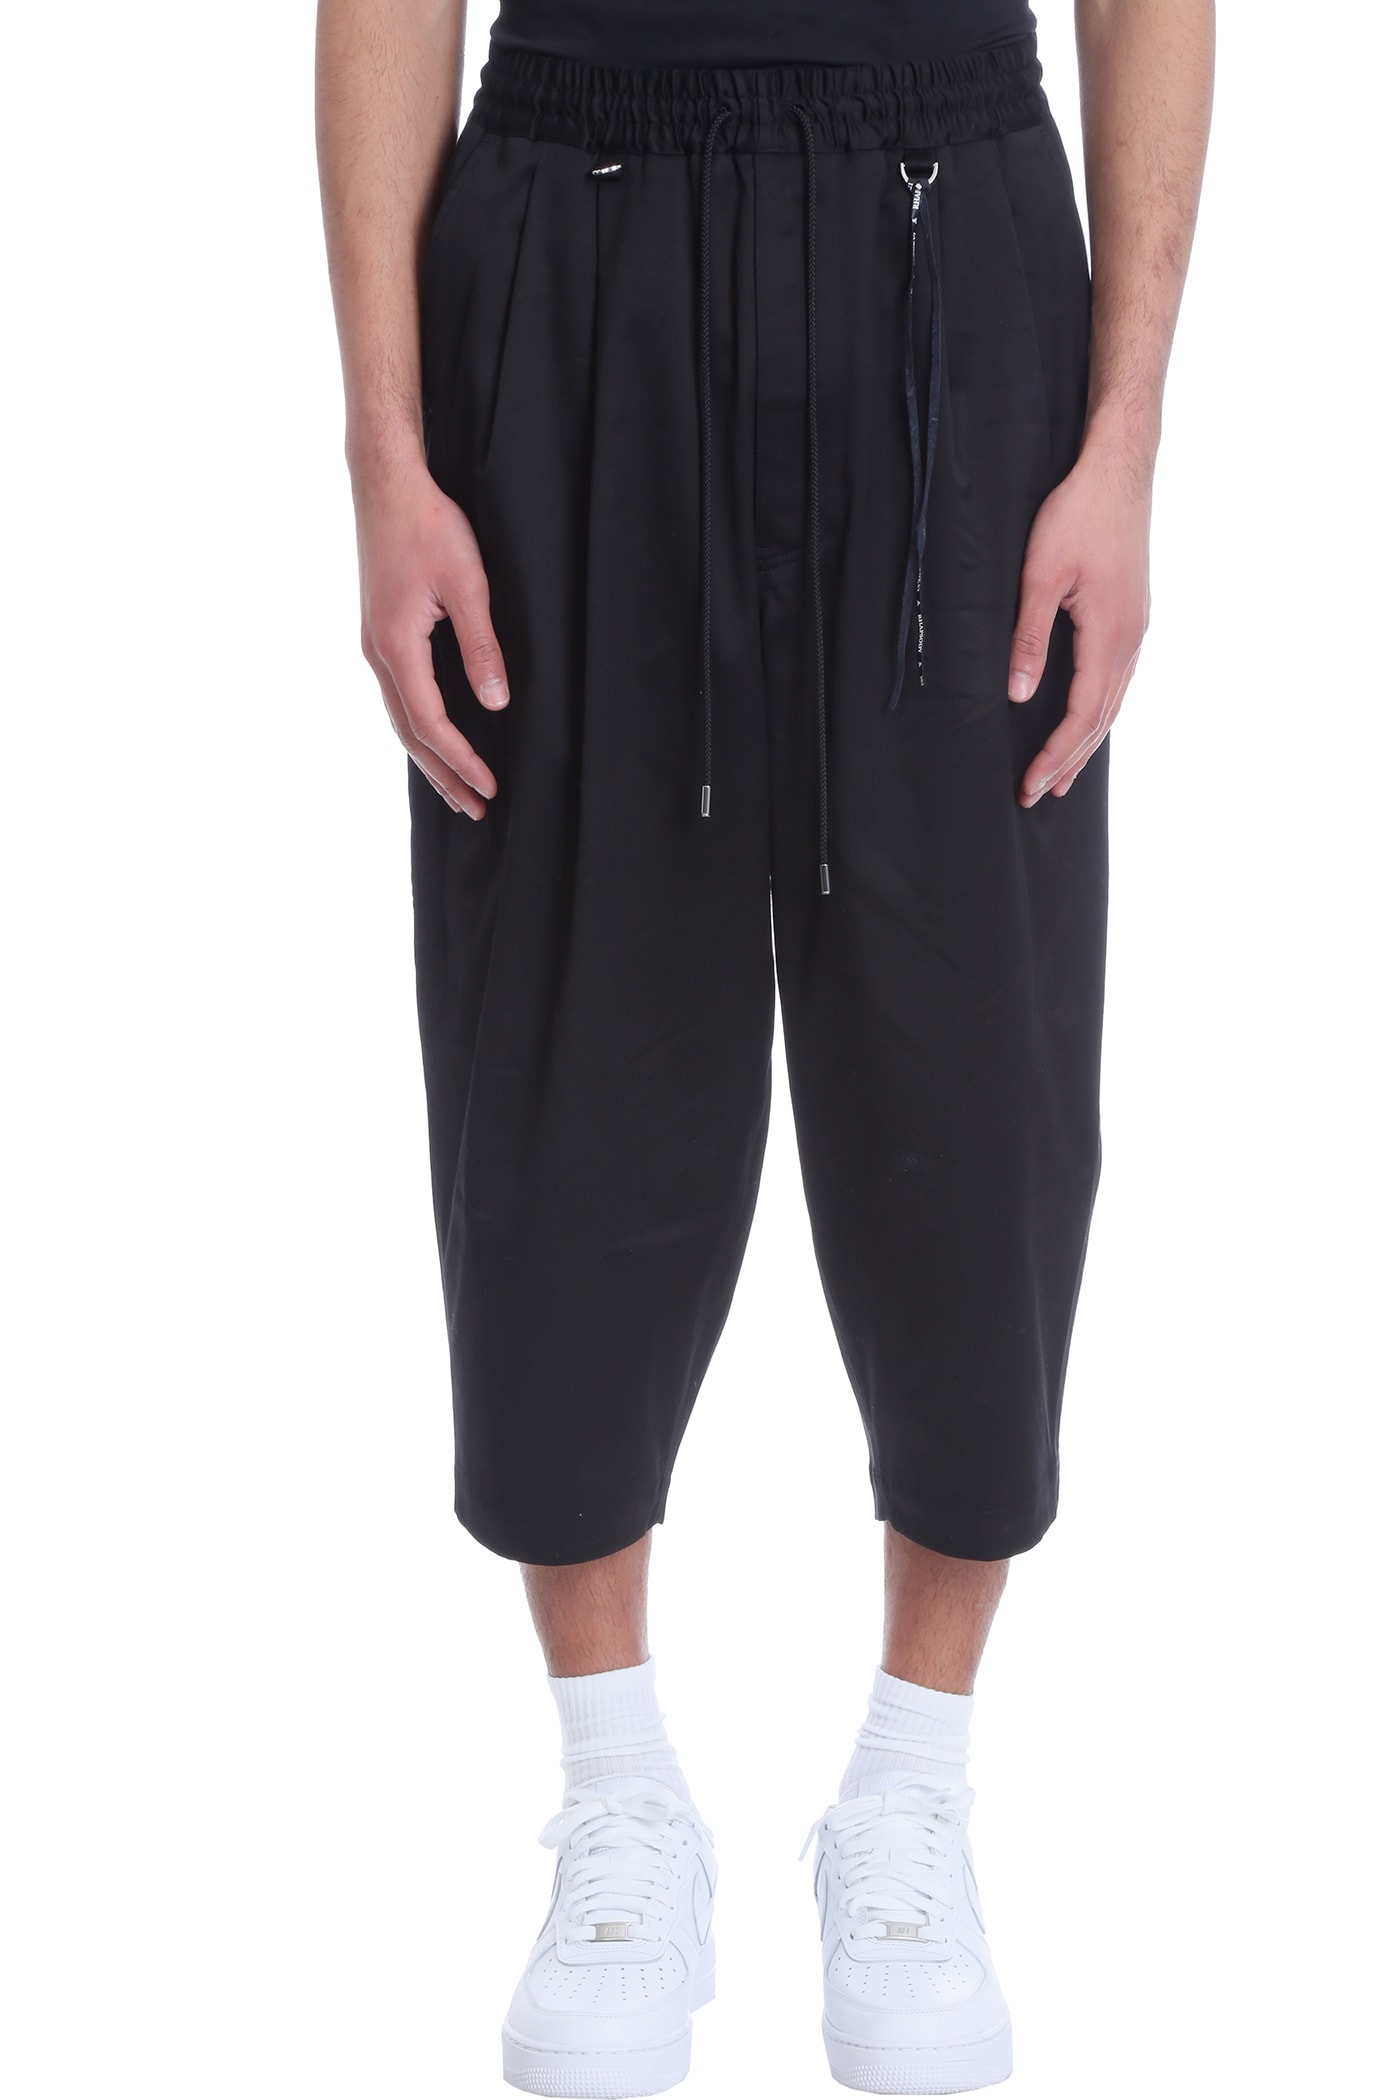 Mastermind Japan Trousers In Black Cotton